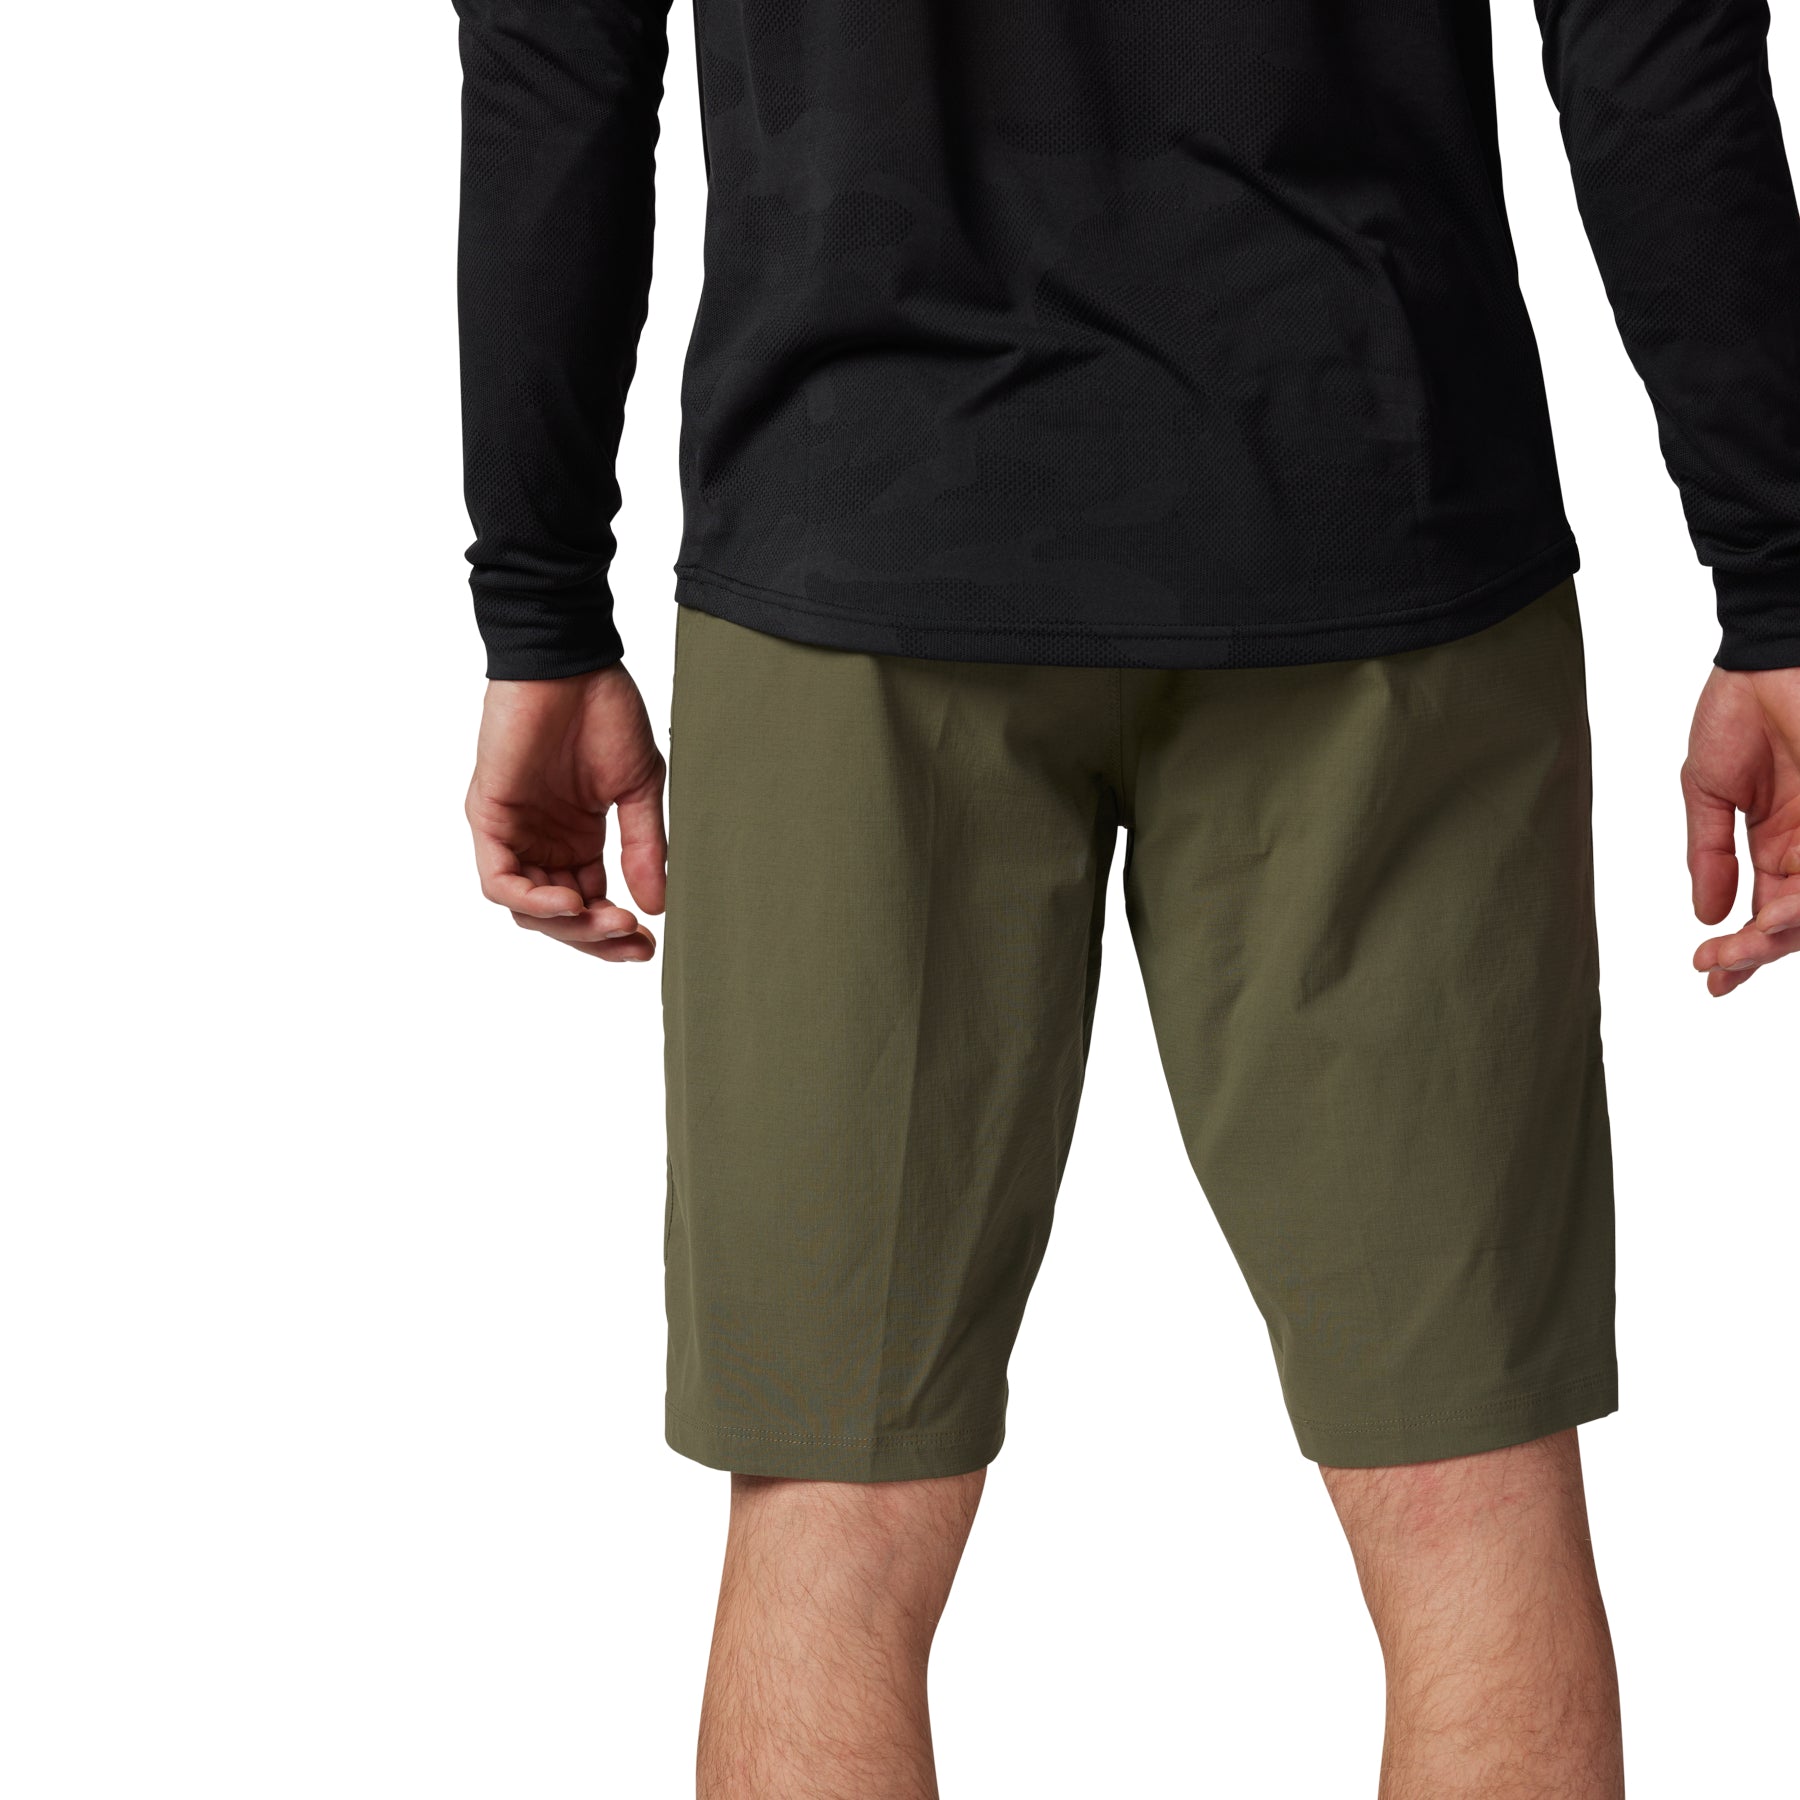 Fox Ranger Shorts Without Liner - L-34 - Olive Green - Image 2